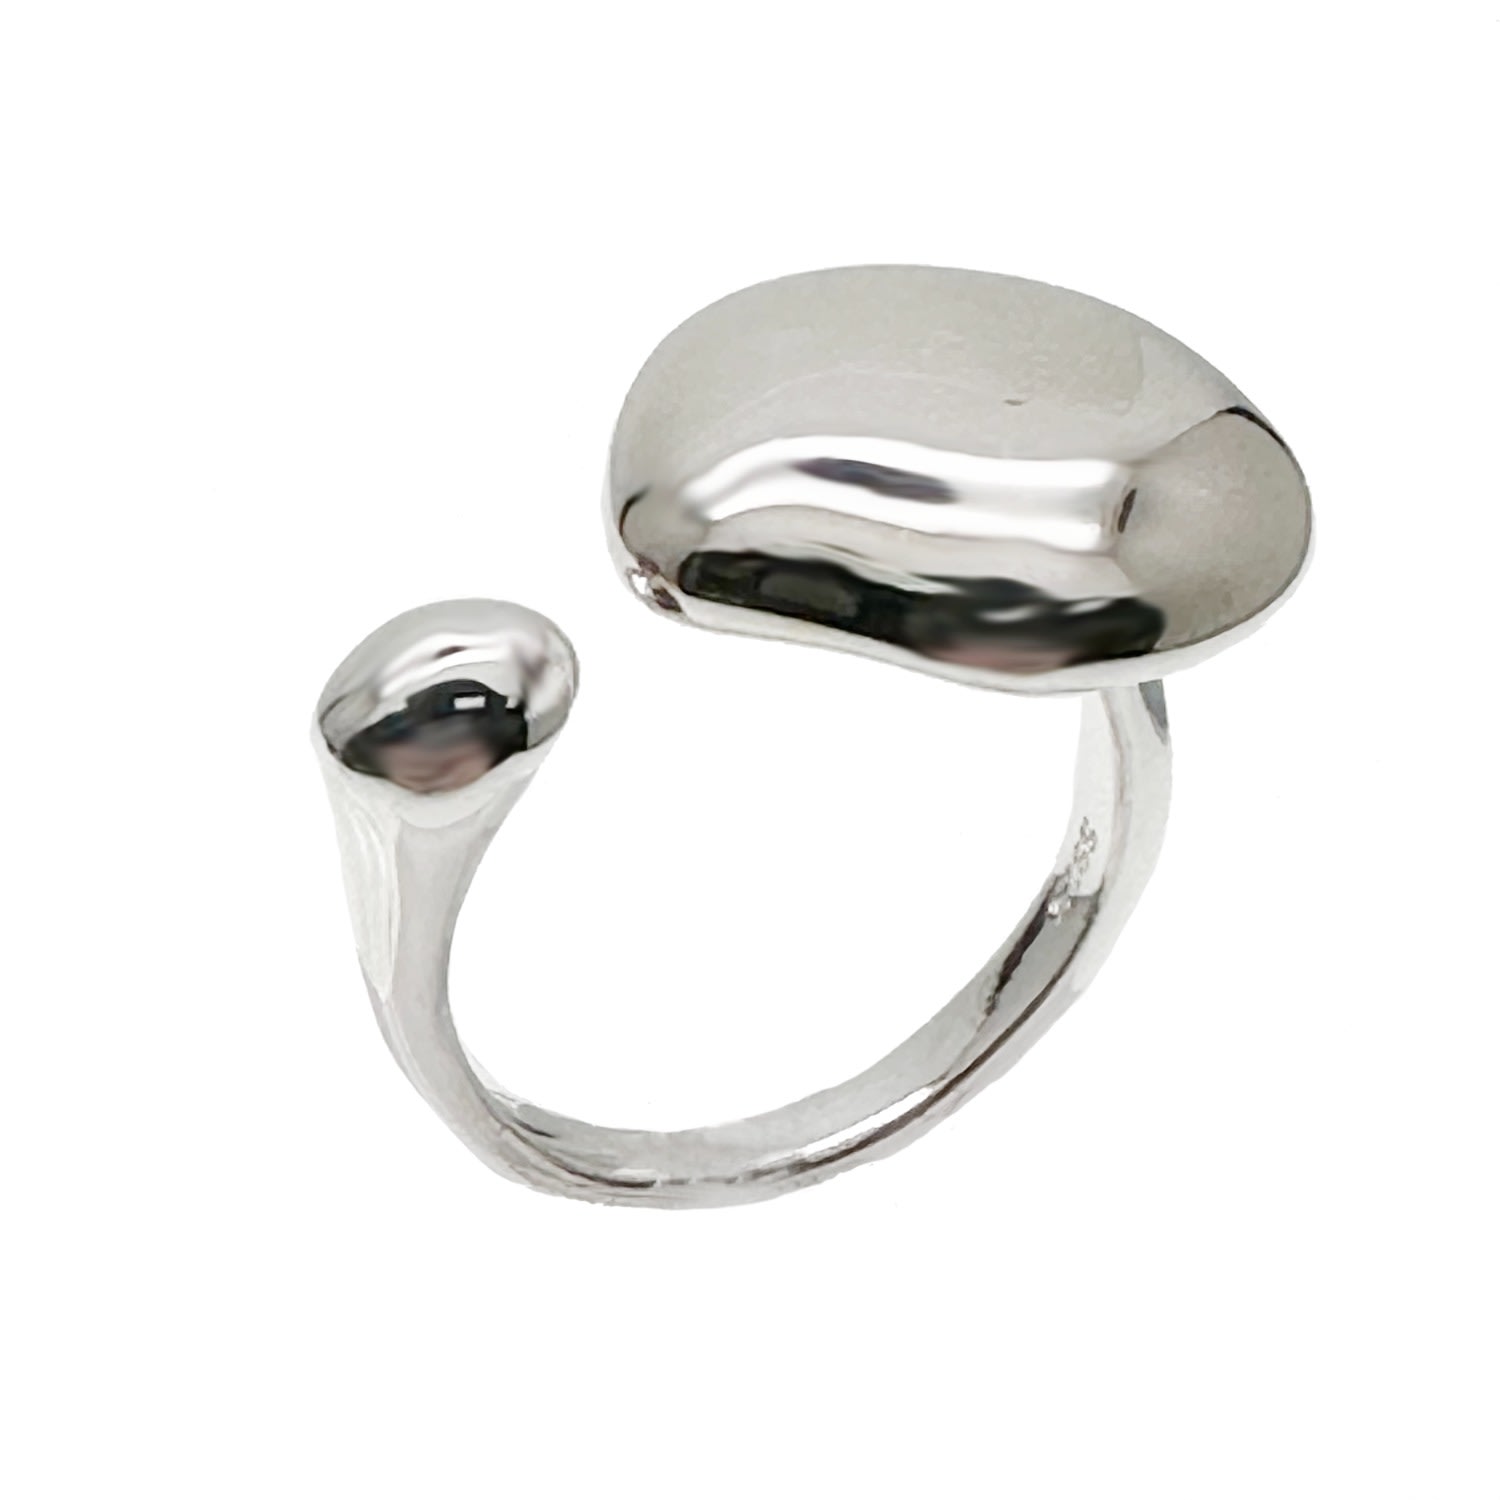 Women’s Morden Style Sterling Silver Open Ring Ms. Donna